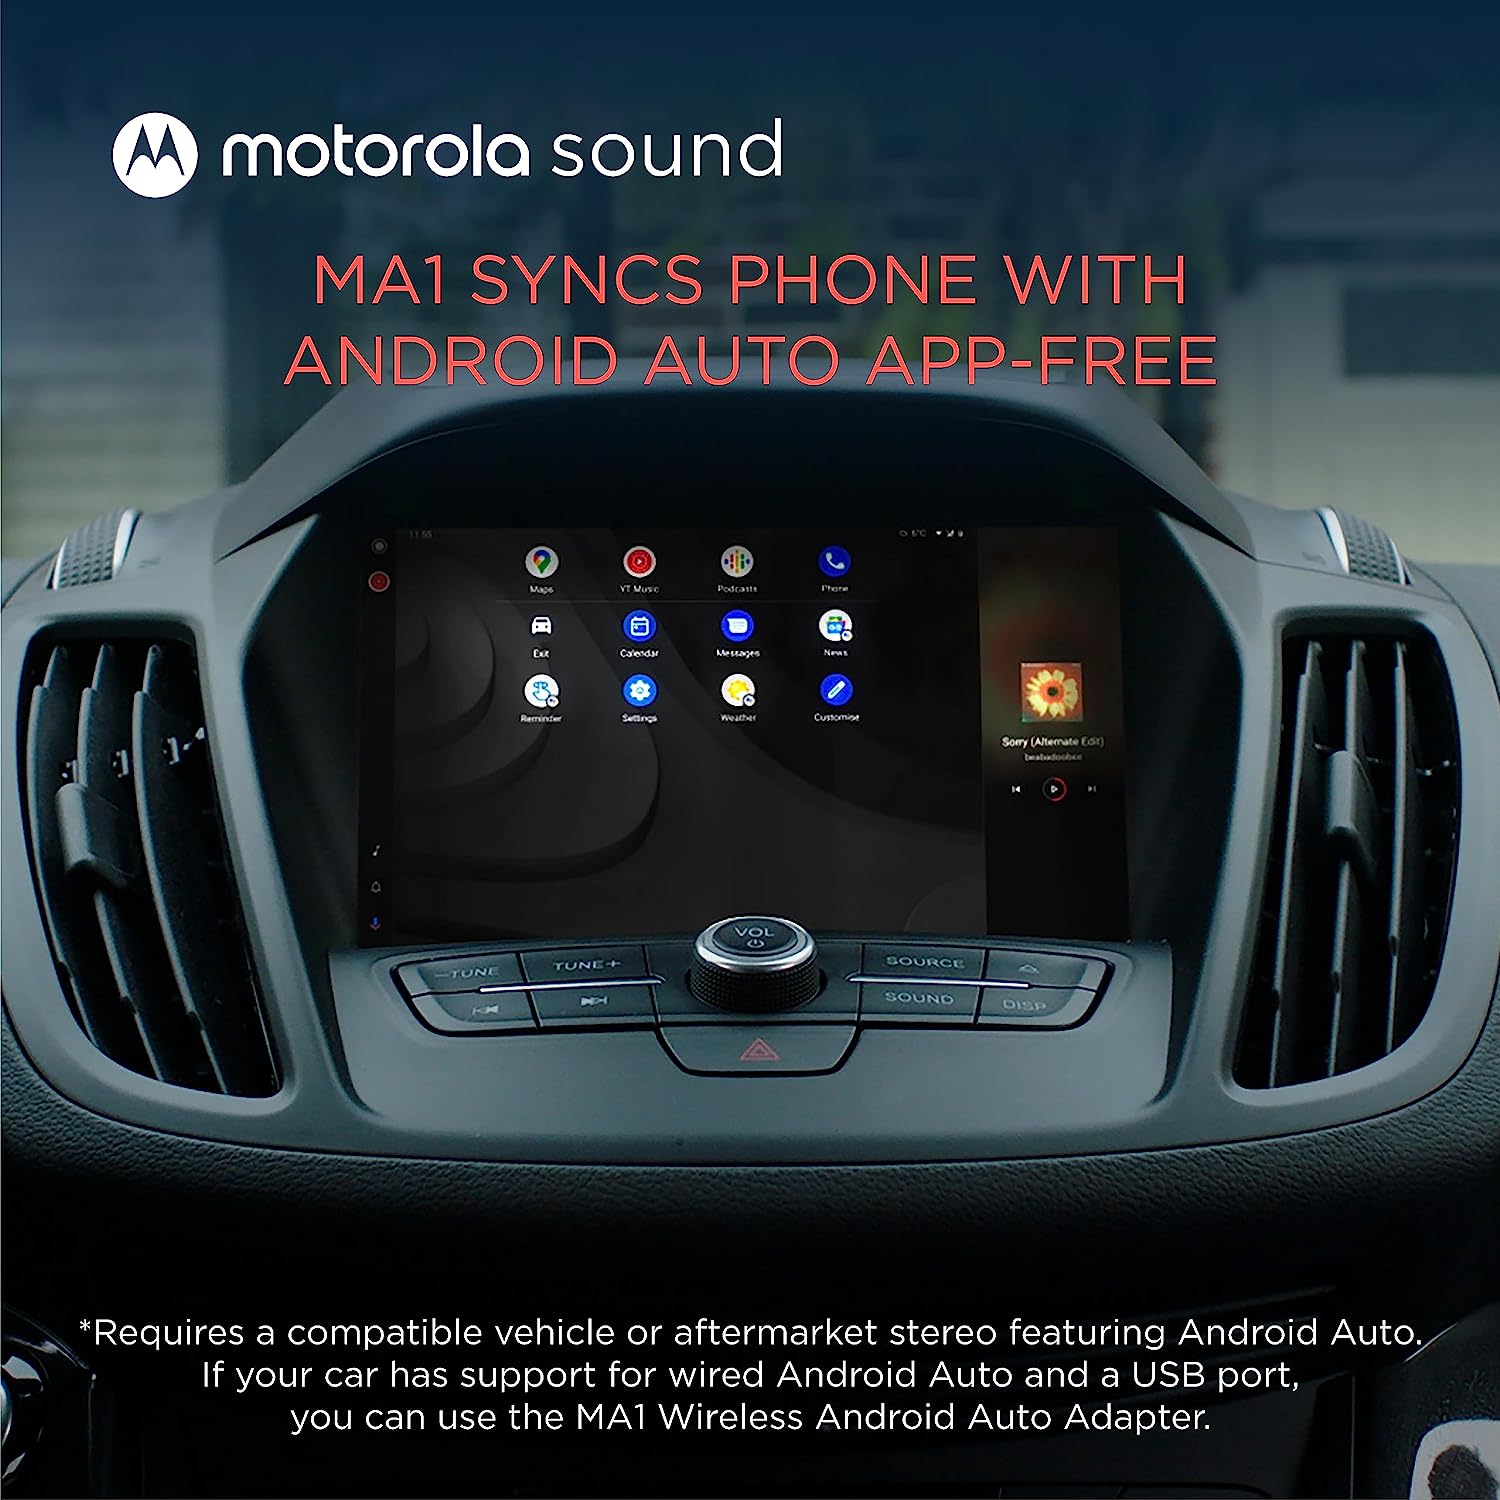 THE MOTOROLA MA1 WIRELESS CAR ADAPTER FOR ANDROID AUTO™ LAUNCHES TODAY -  Jan 5, 2022